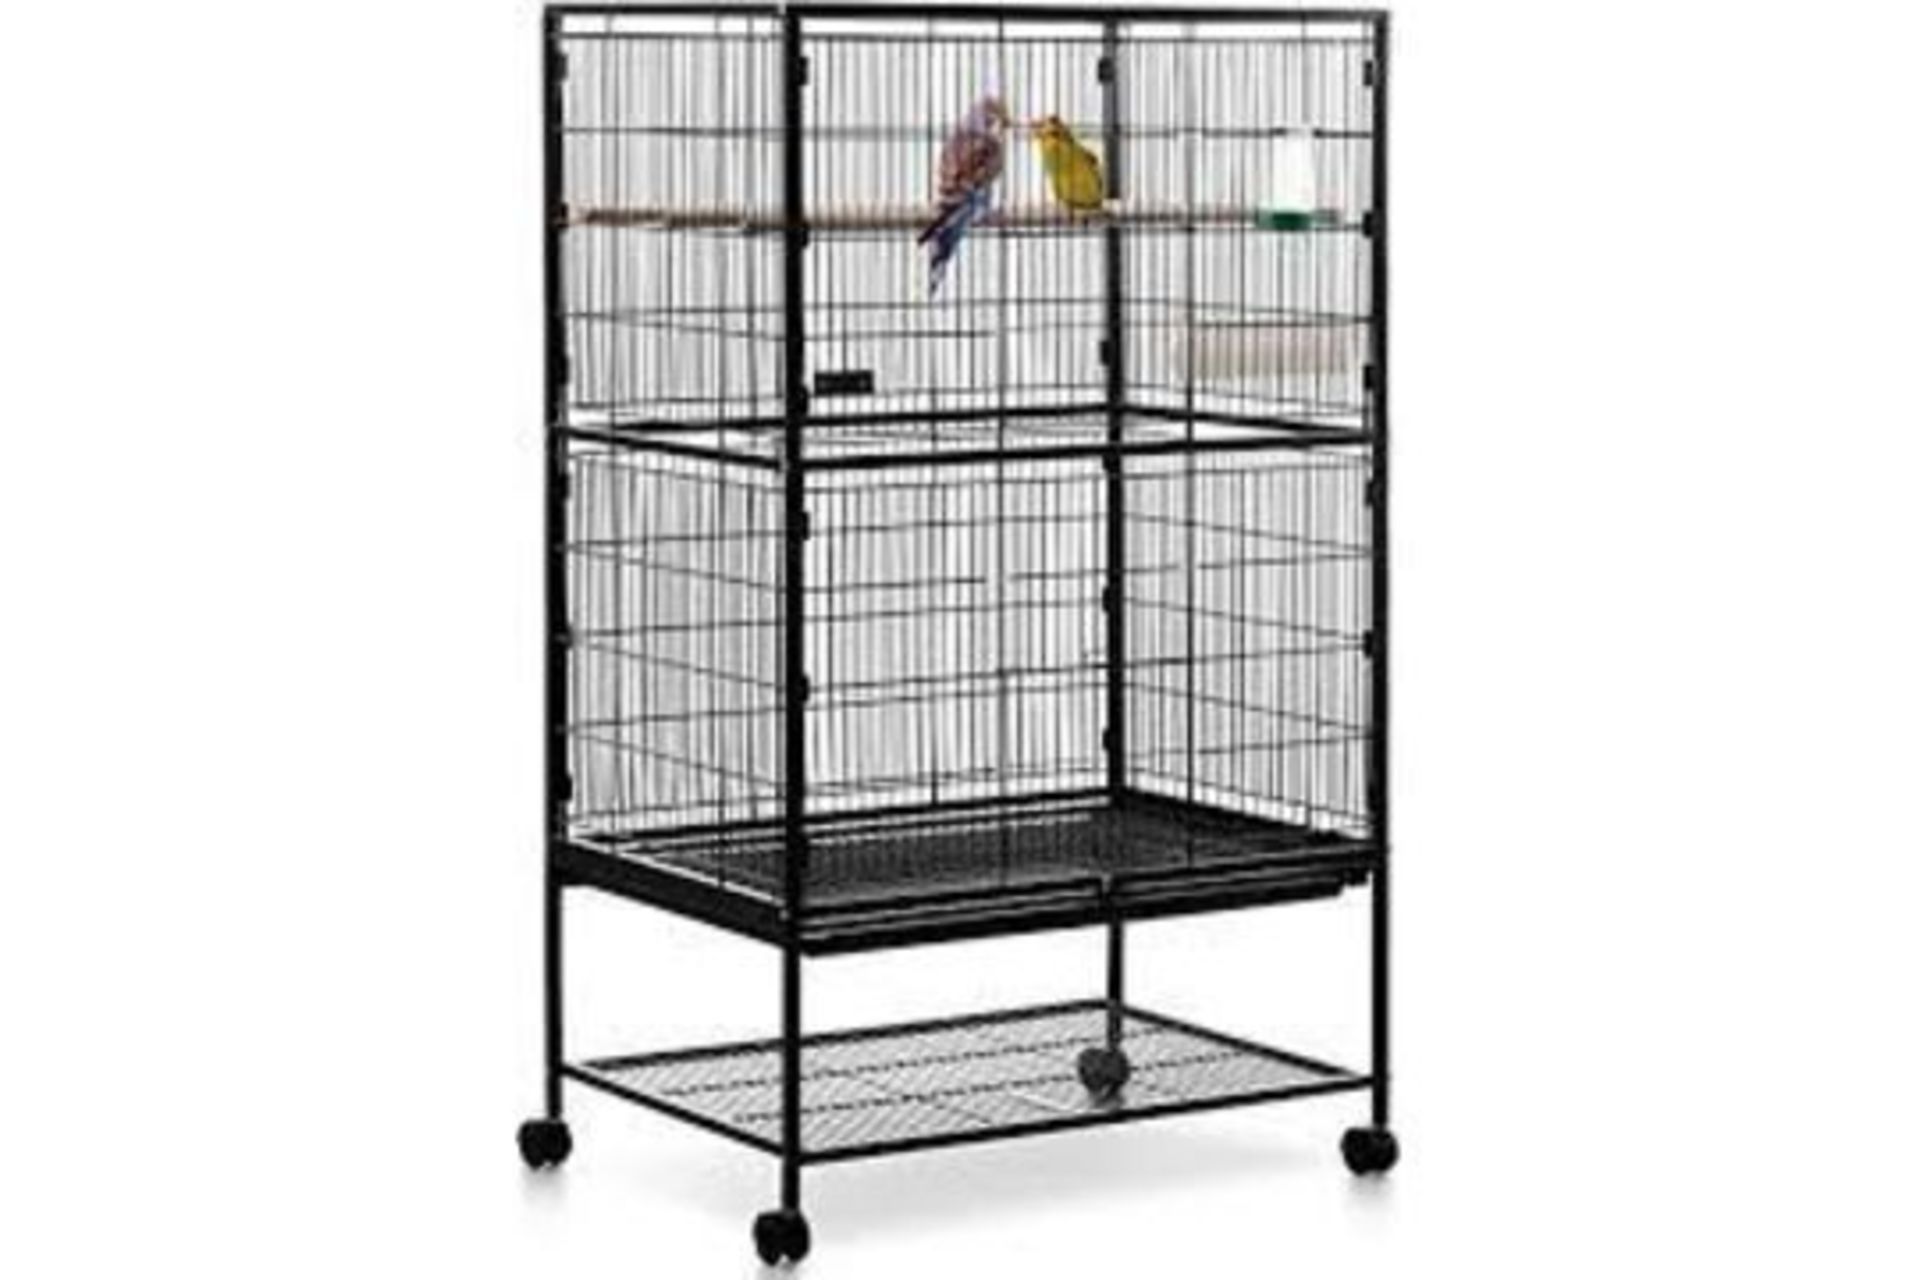 Pallet to Include 5 x Brand New & Boxed MILO & MISTY Large Bird Cage – 2 Tier Parrot Cage Metal